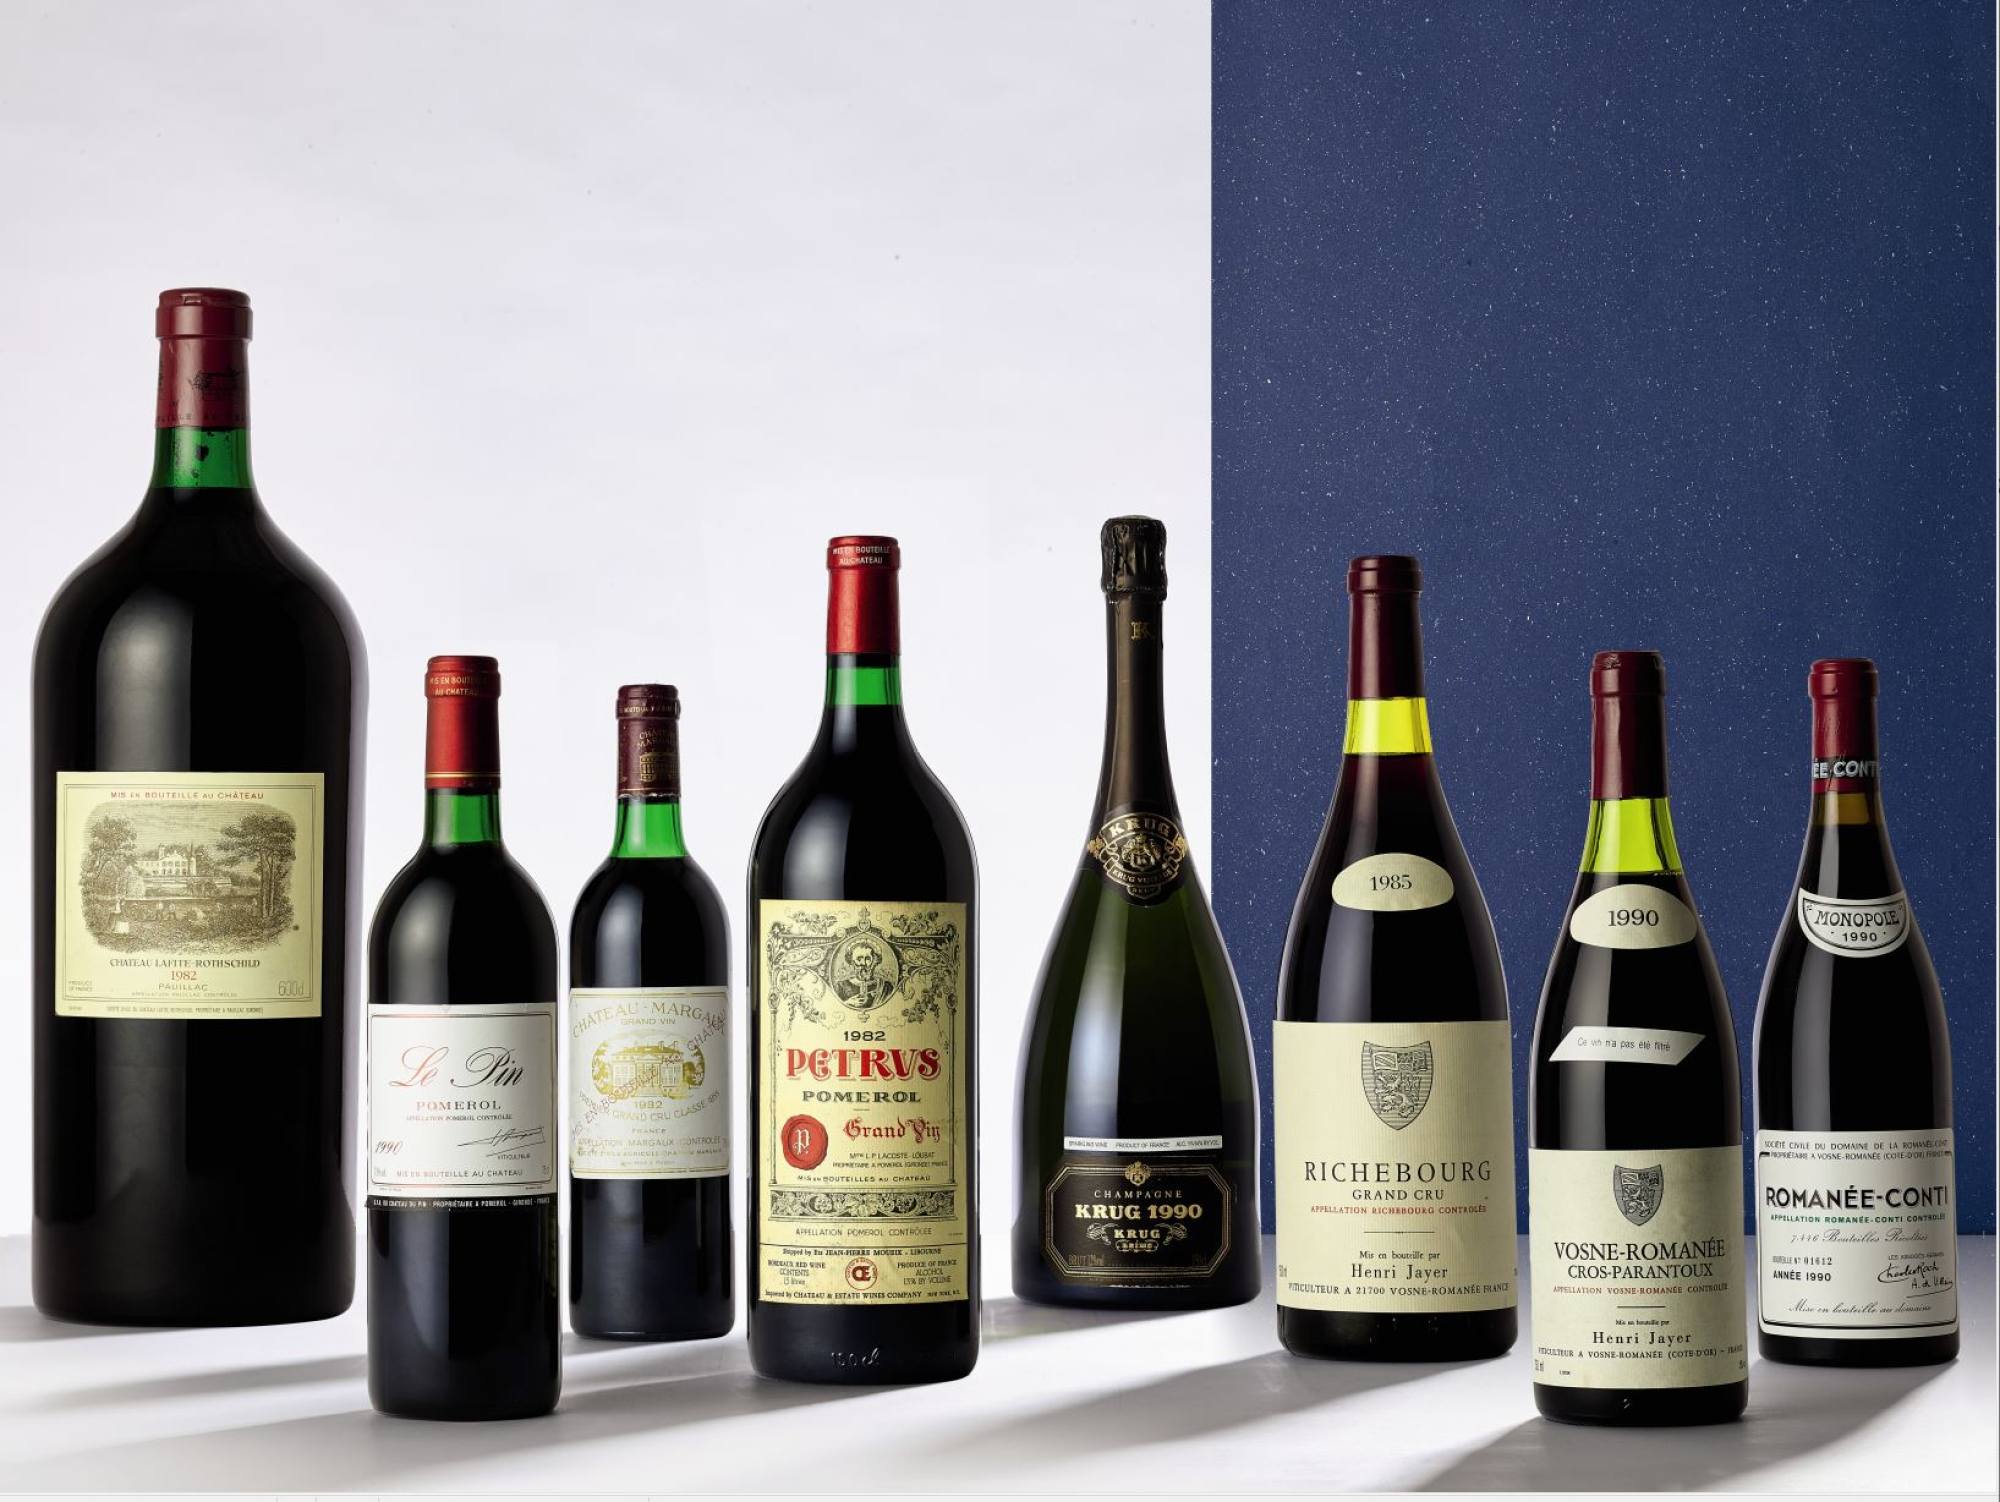 Christian Dior Wine & Spirits for Sale at Auction